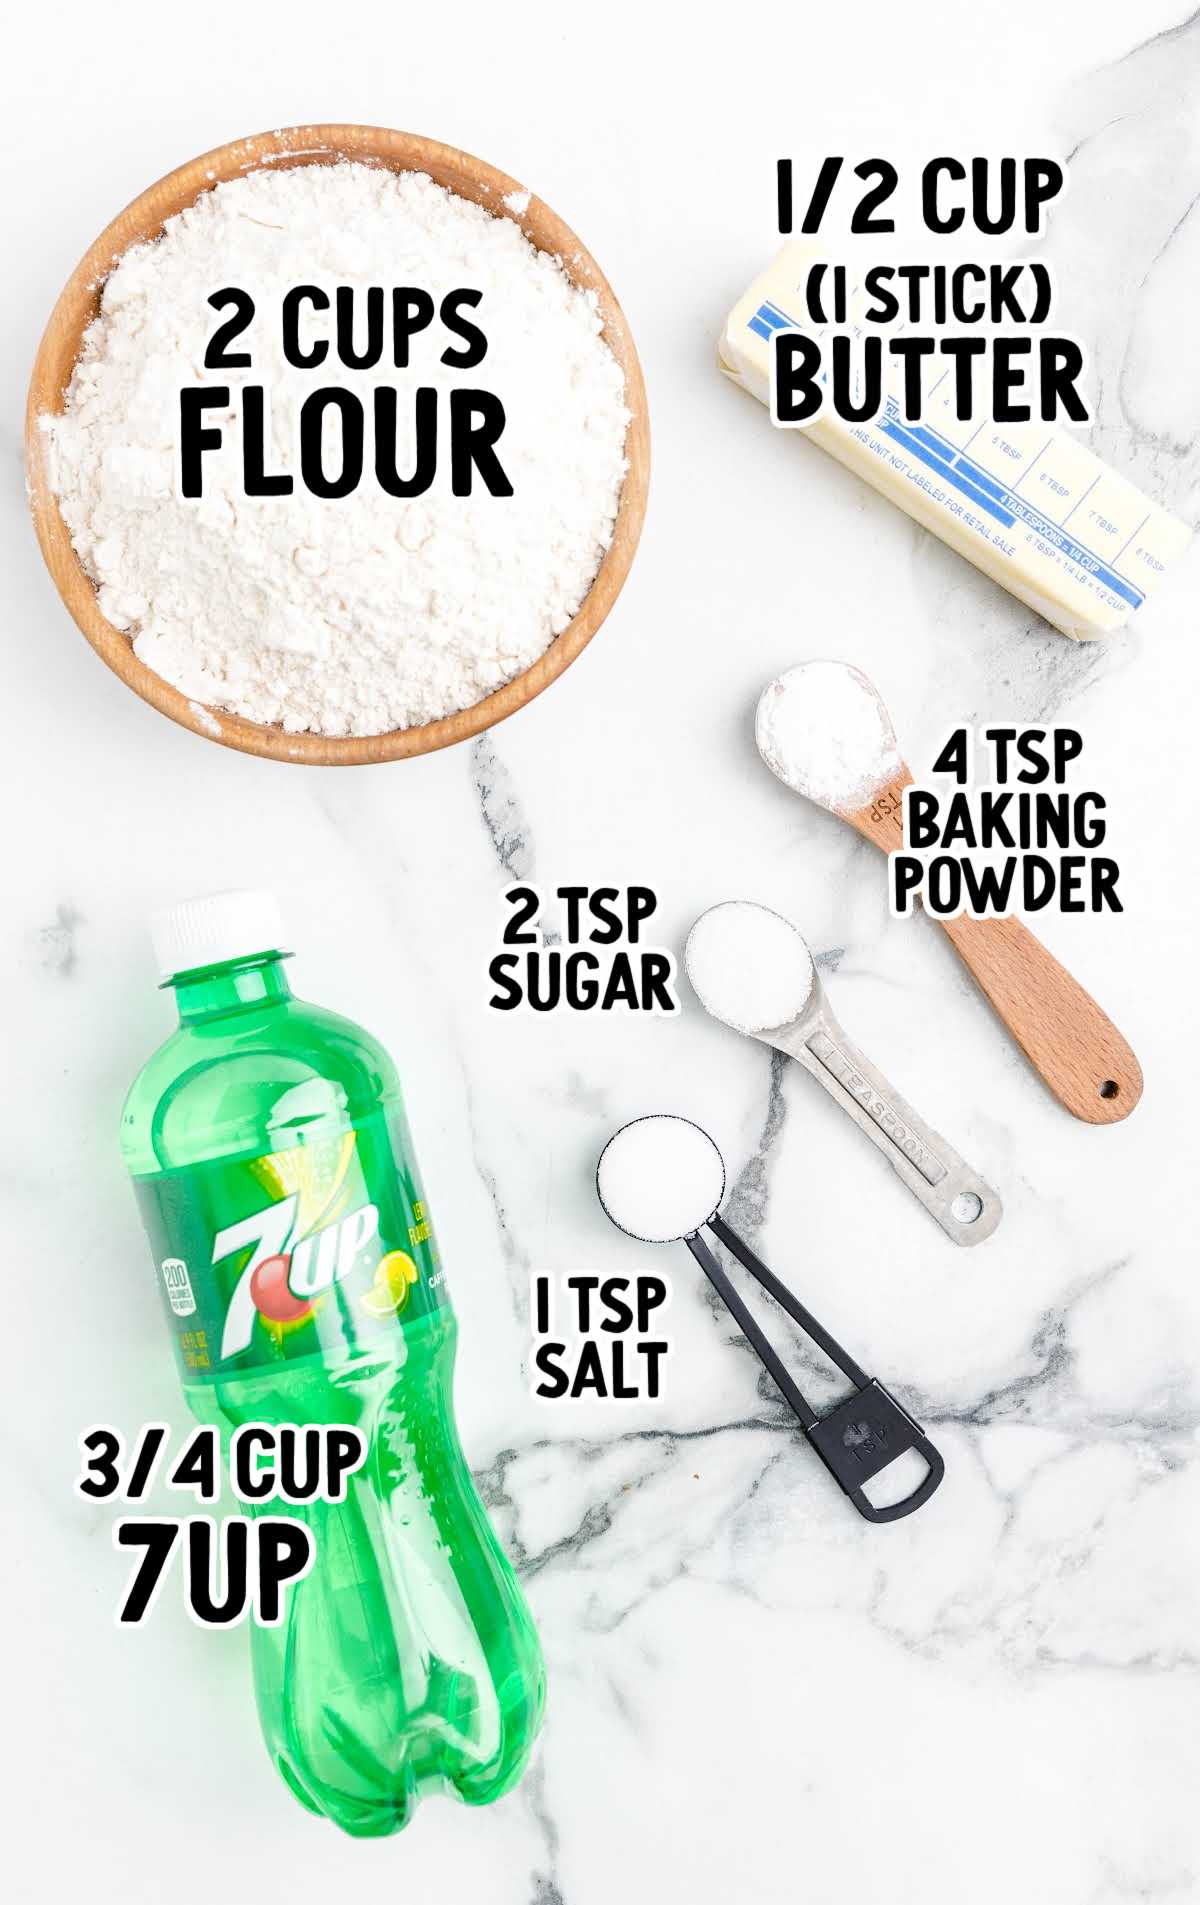 7up biscuits raw ingredients that are labeled